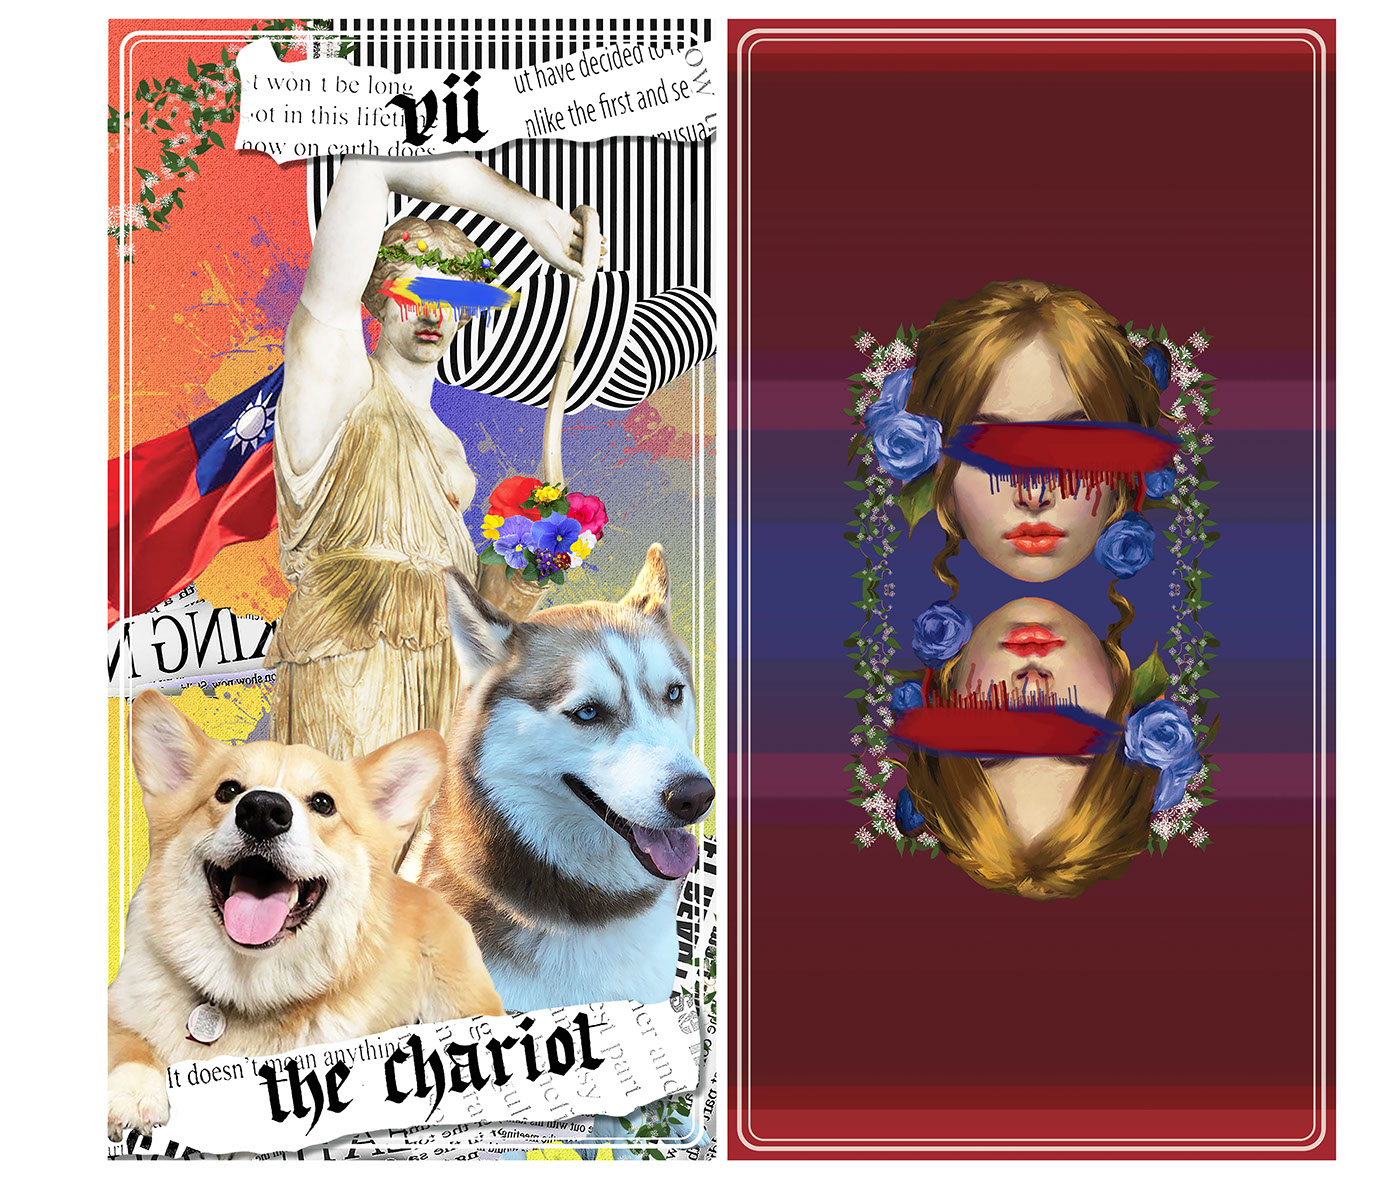 tarot card collage collage art abstract Primary colors self portrait playing card